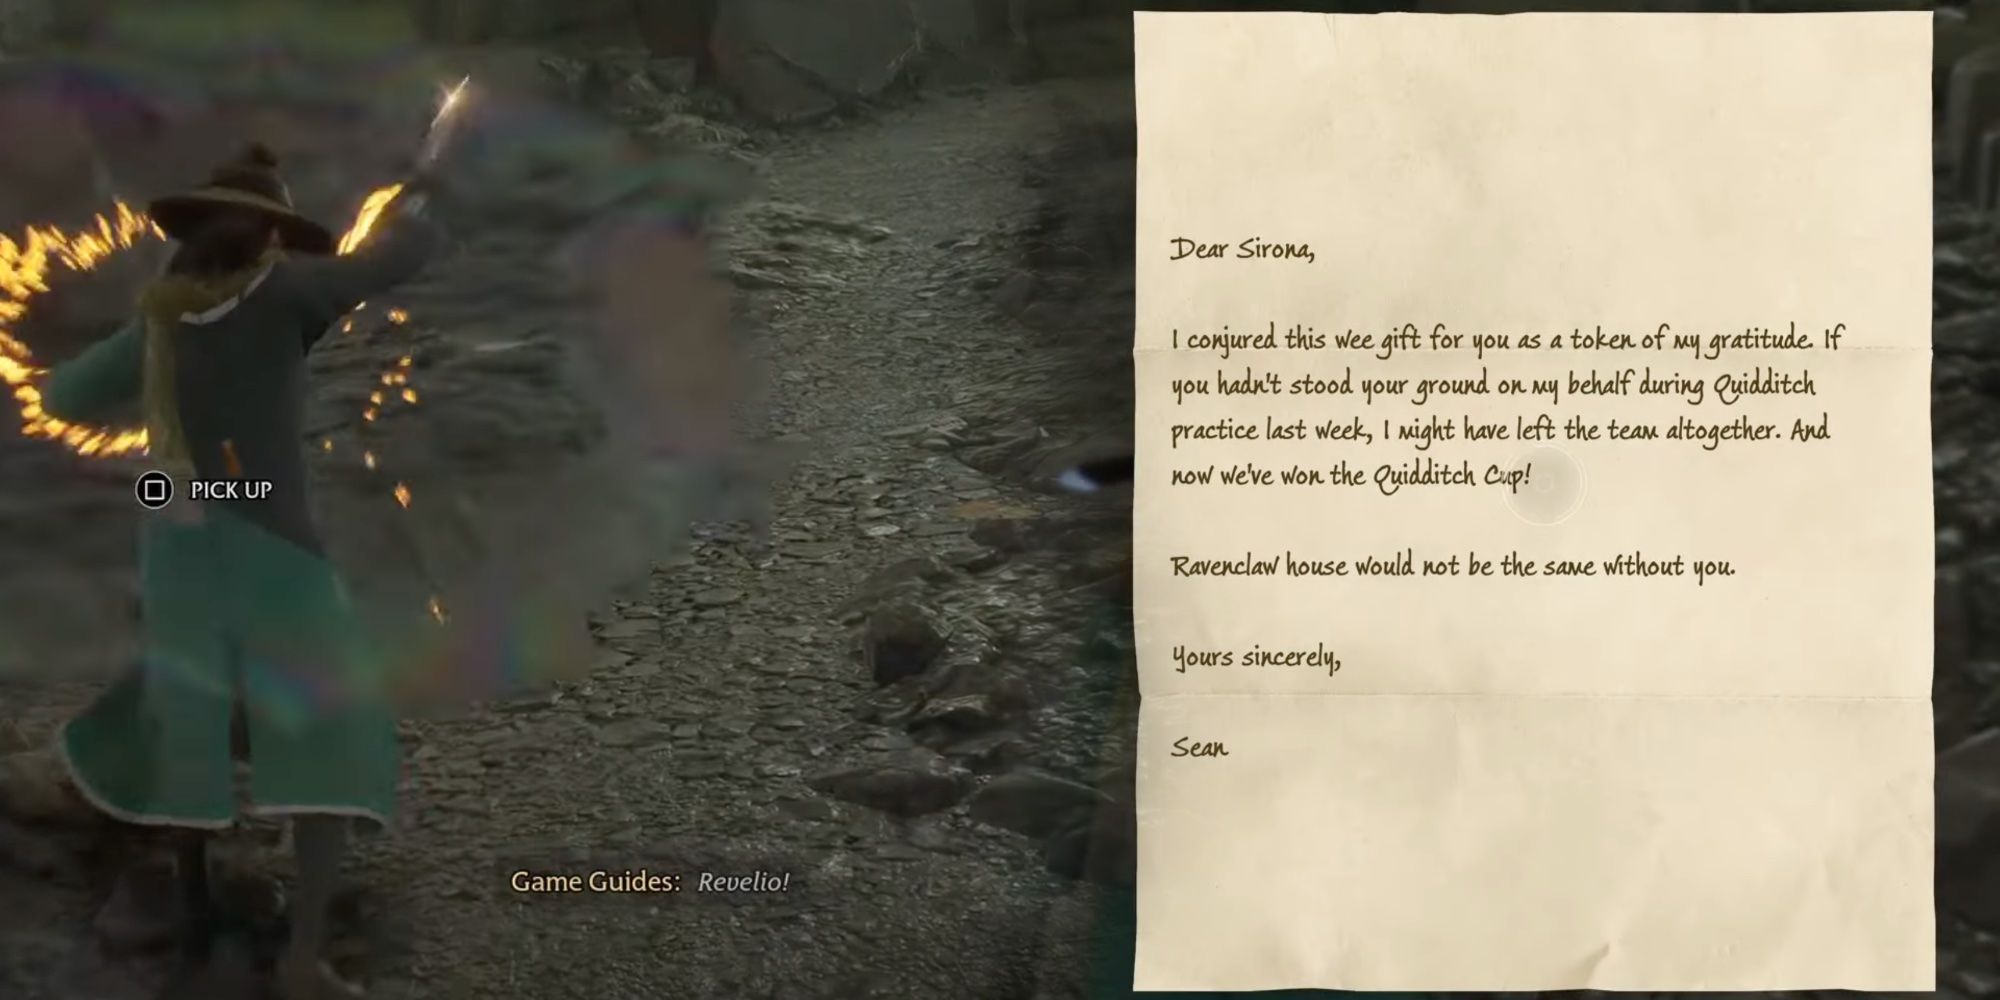 Player's character casting revelio on the left, and on the right one of Sirona's letters